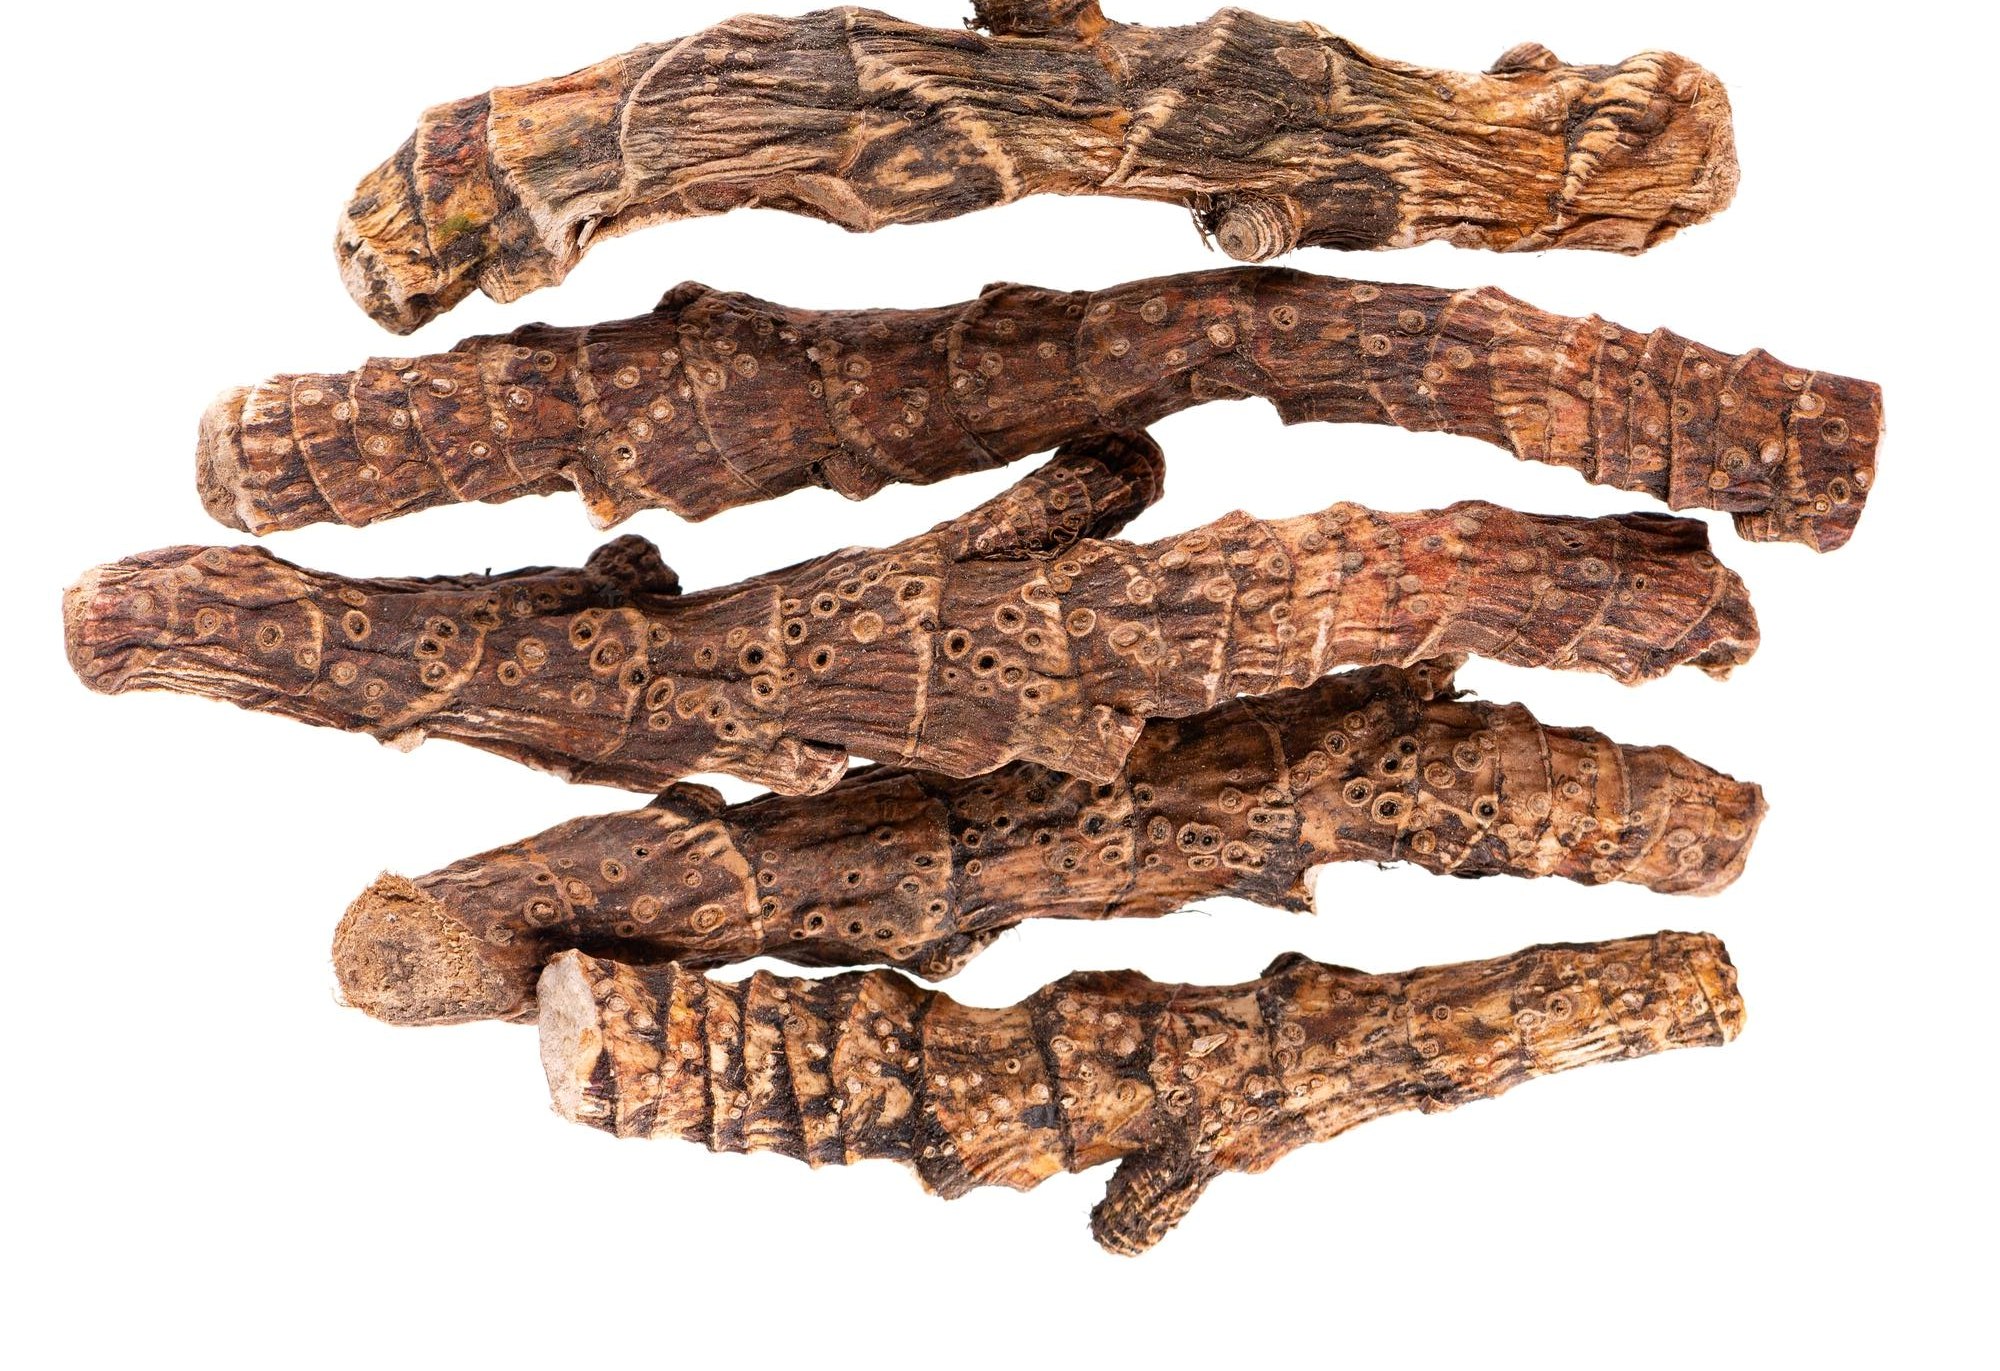 What is the benefit of Vasambu (dried)